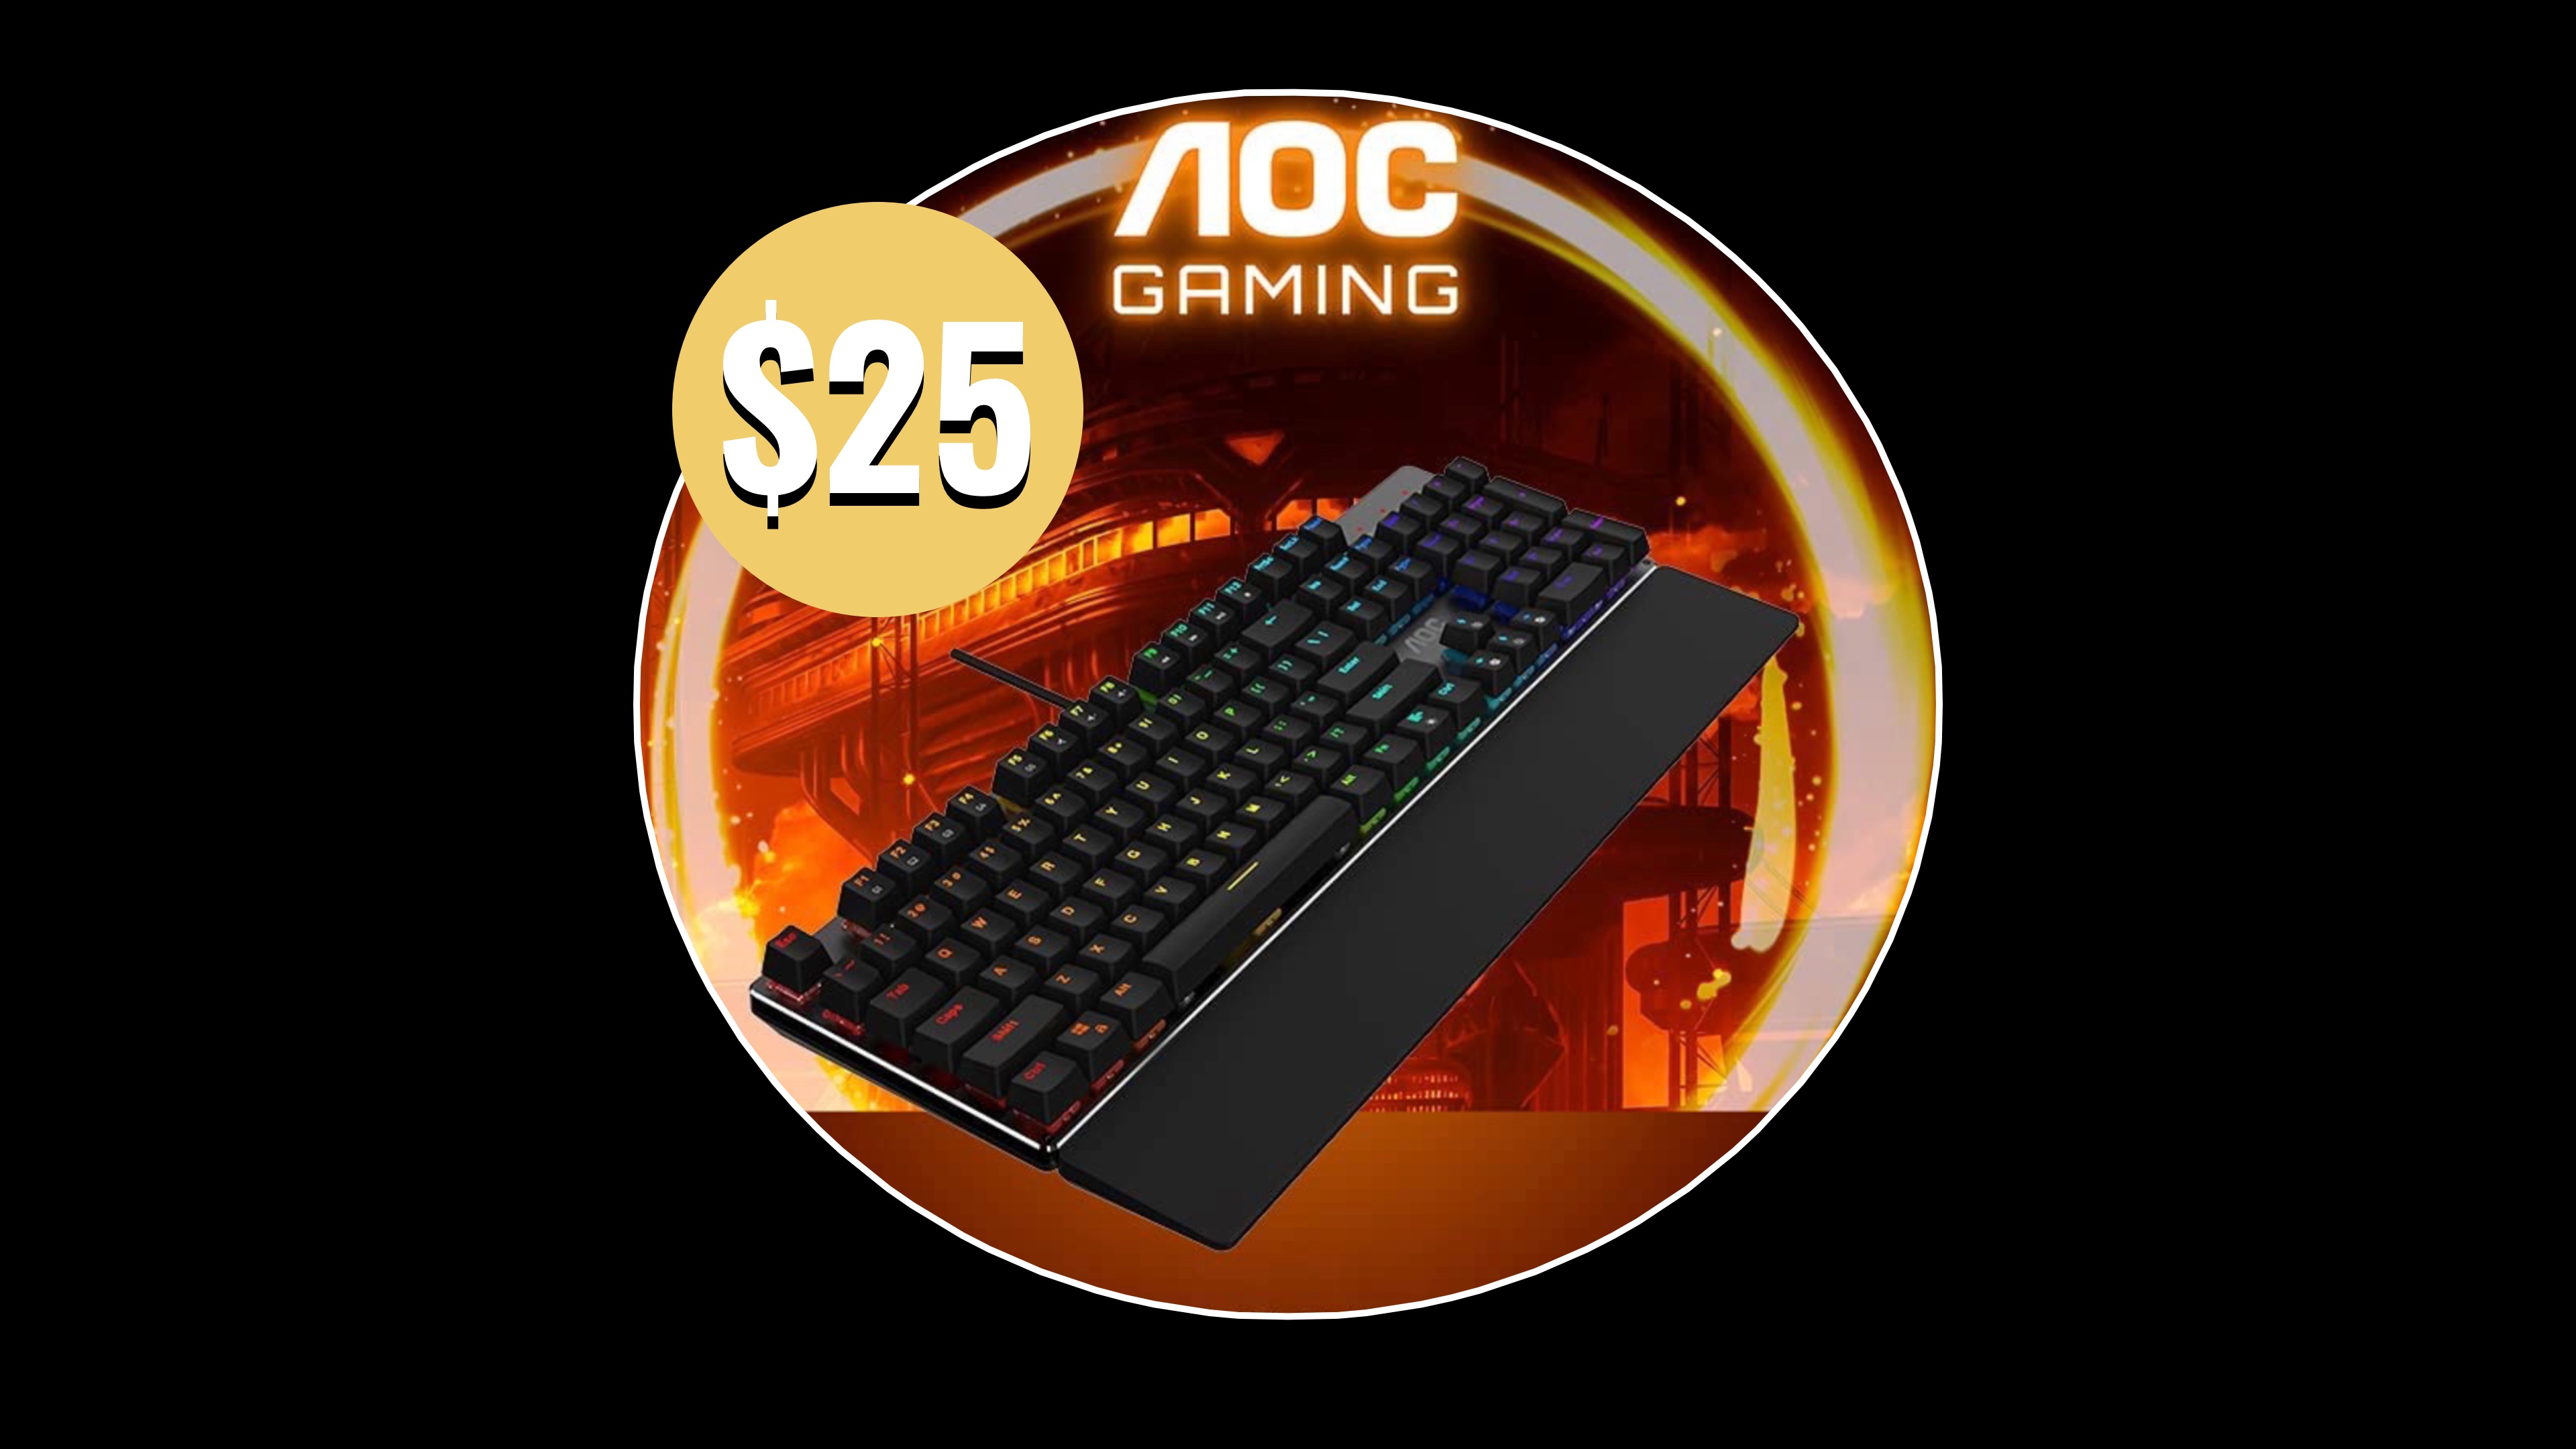 This RGB mechanical gaming keyboard is on sale for just $25